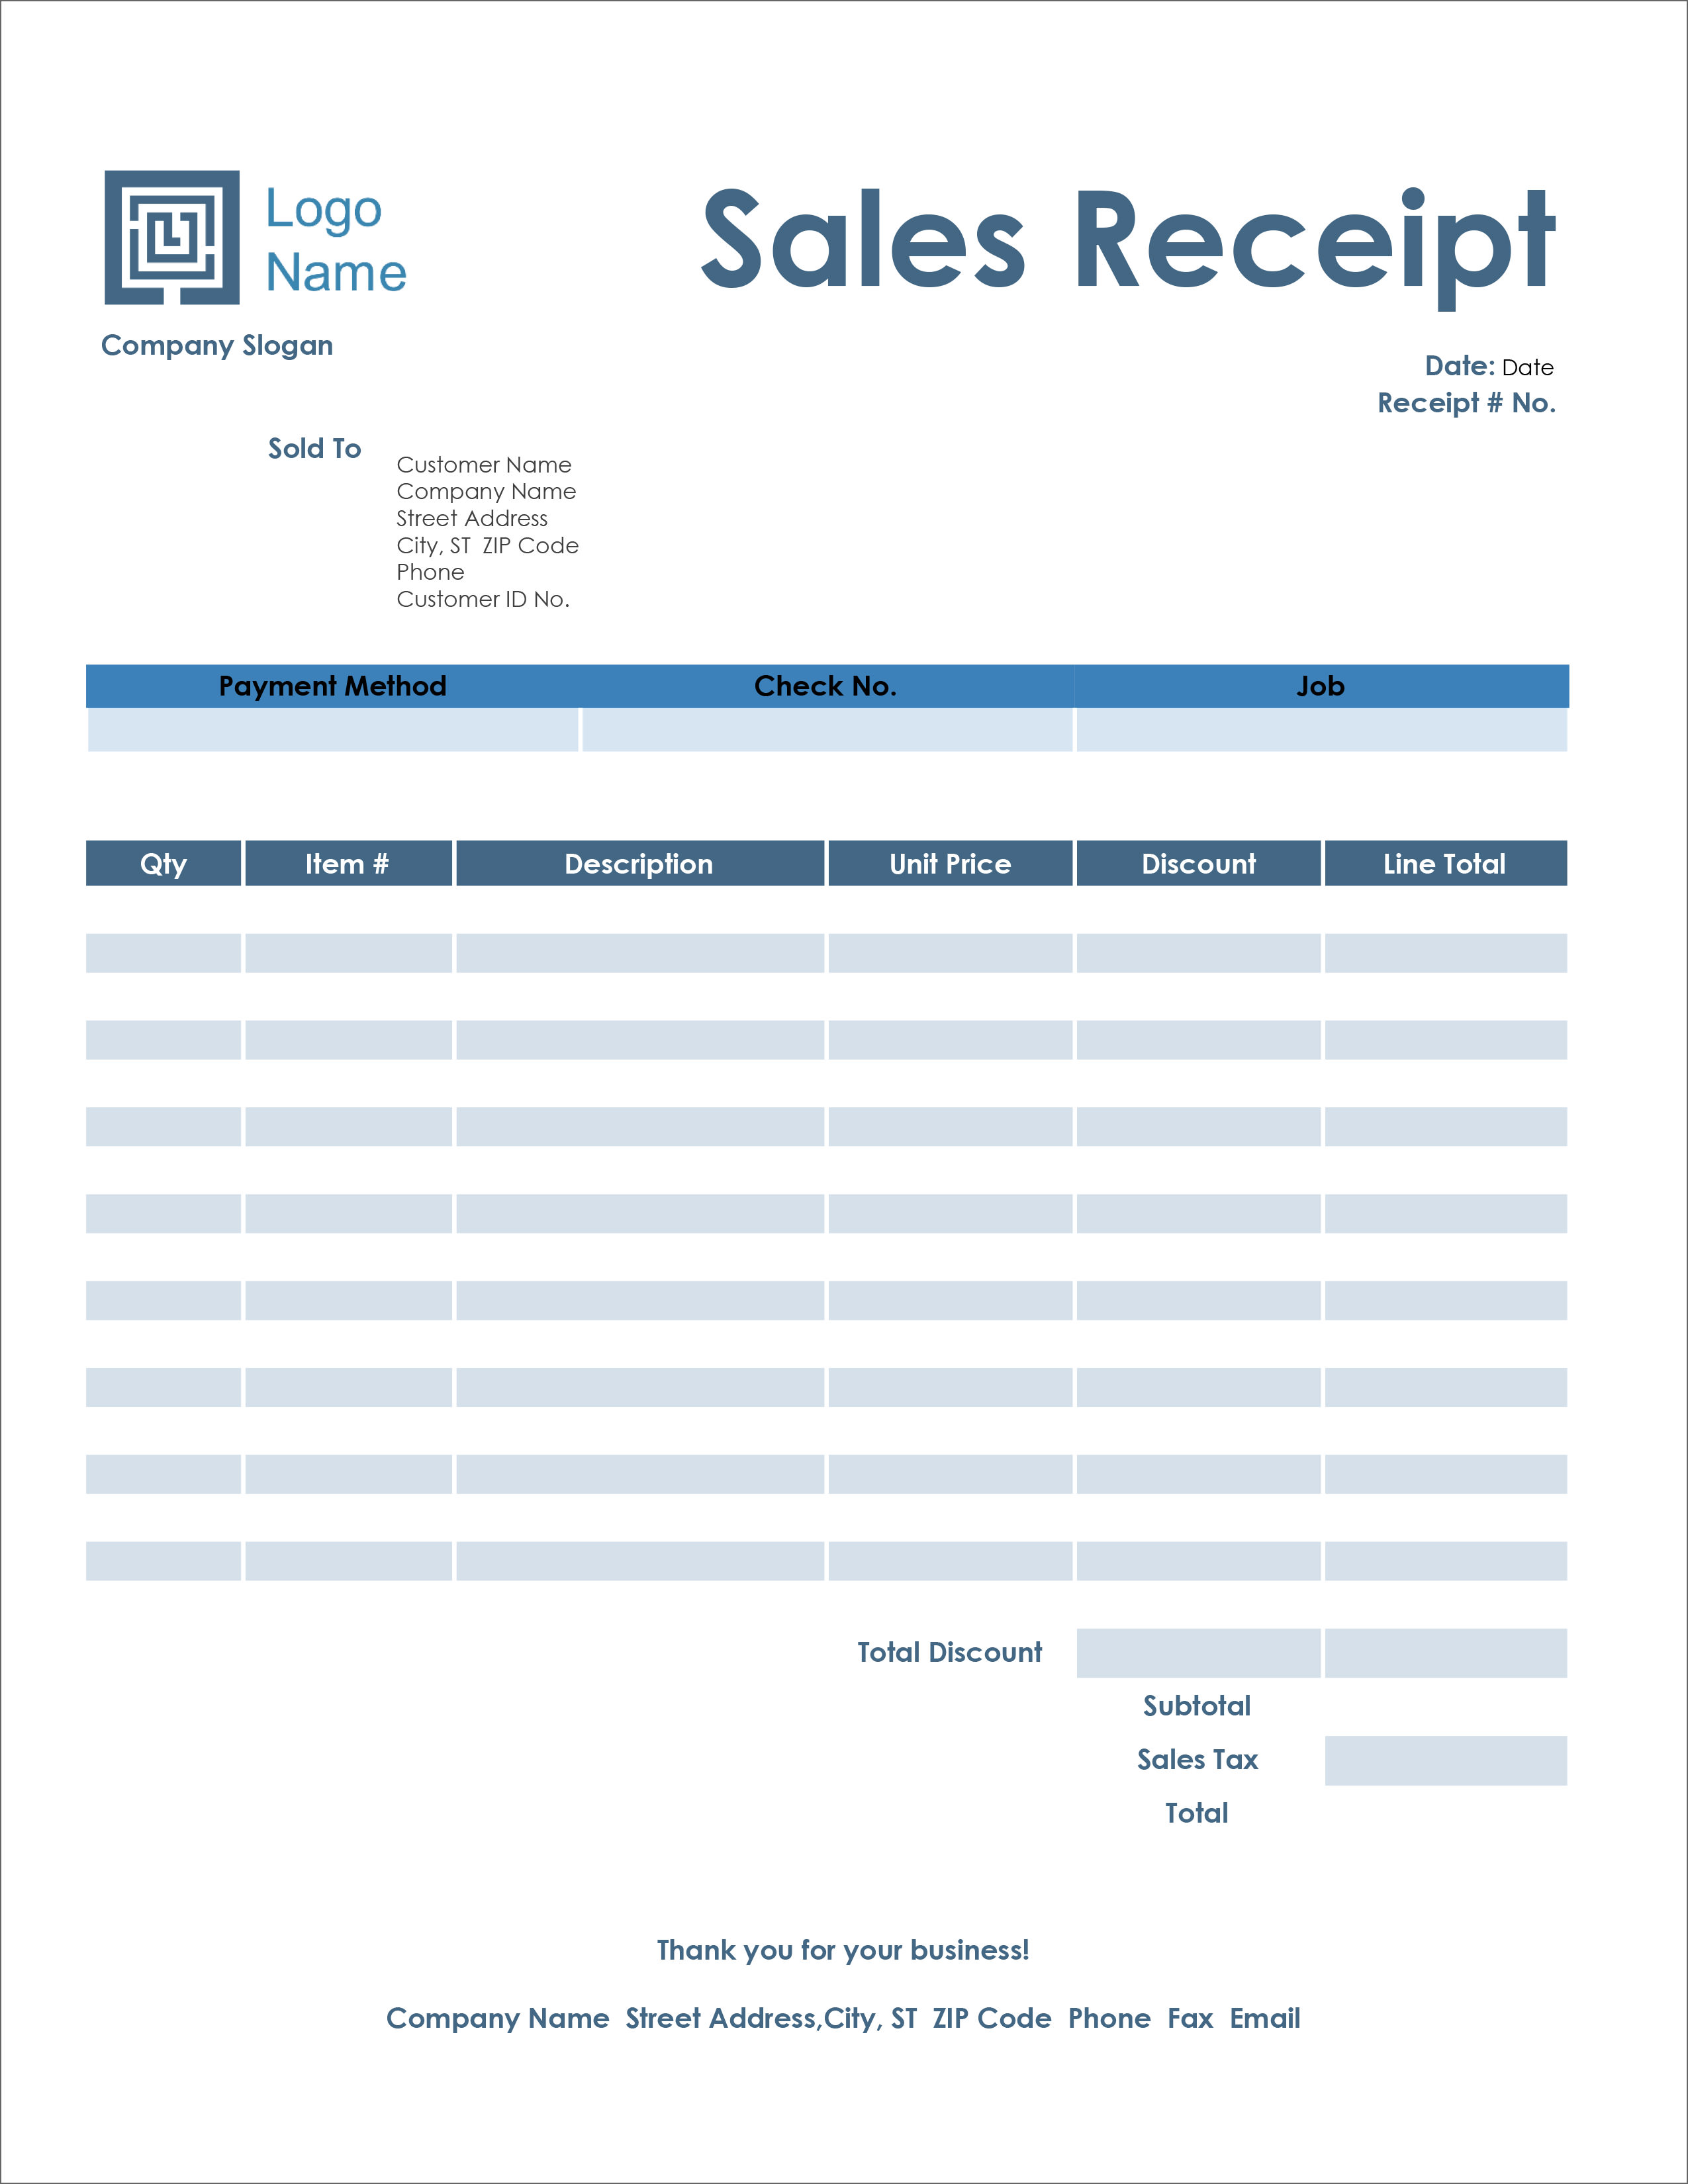 21 Free Receipt Templates - Download For Microsoft Word, Excel Regarding Credit Card Receipt Template